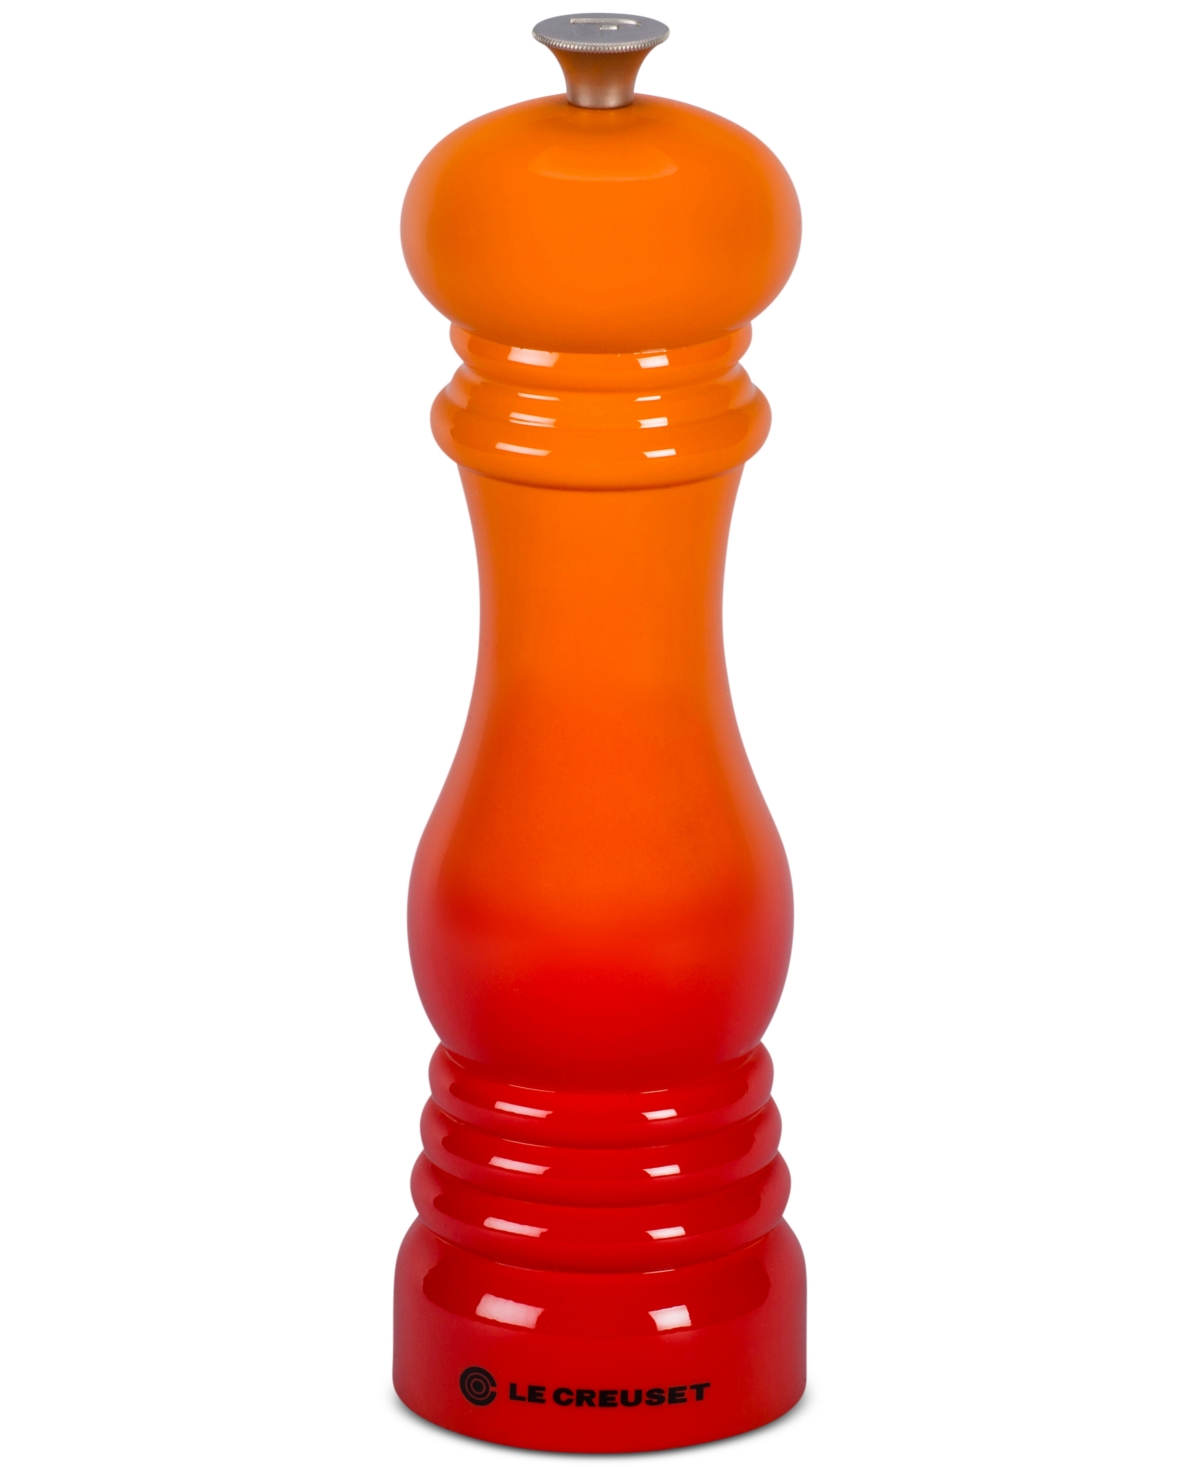 LE CREUSET PEPPER MILL WITH ADJUSTABLE GRIND SETTING